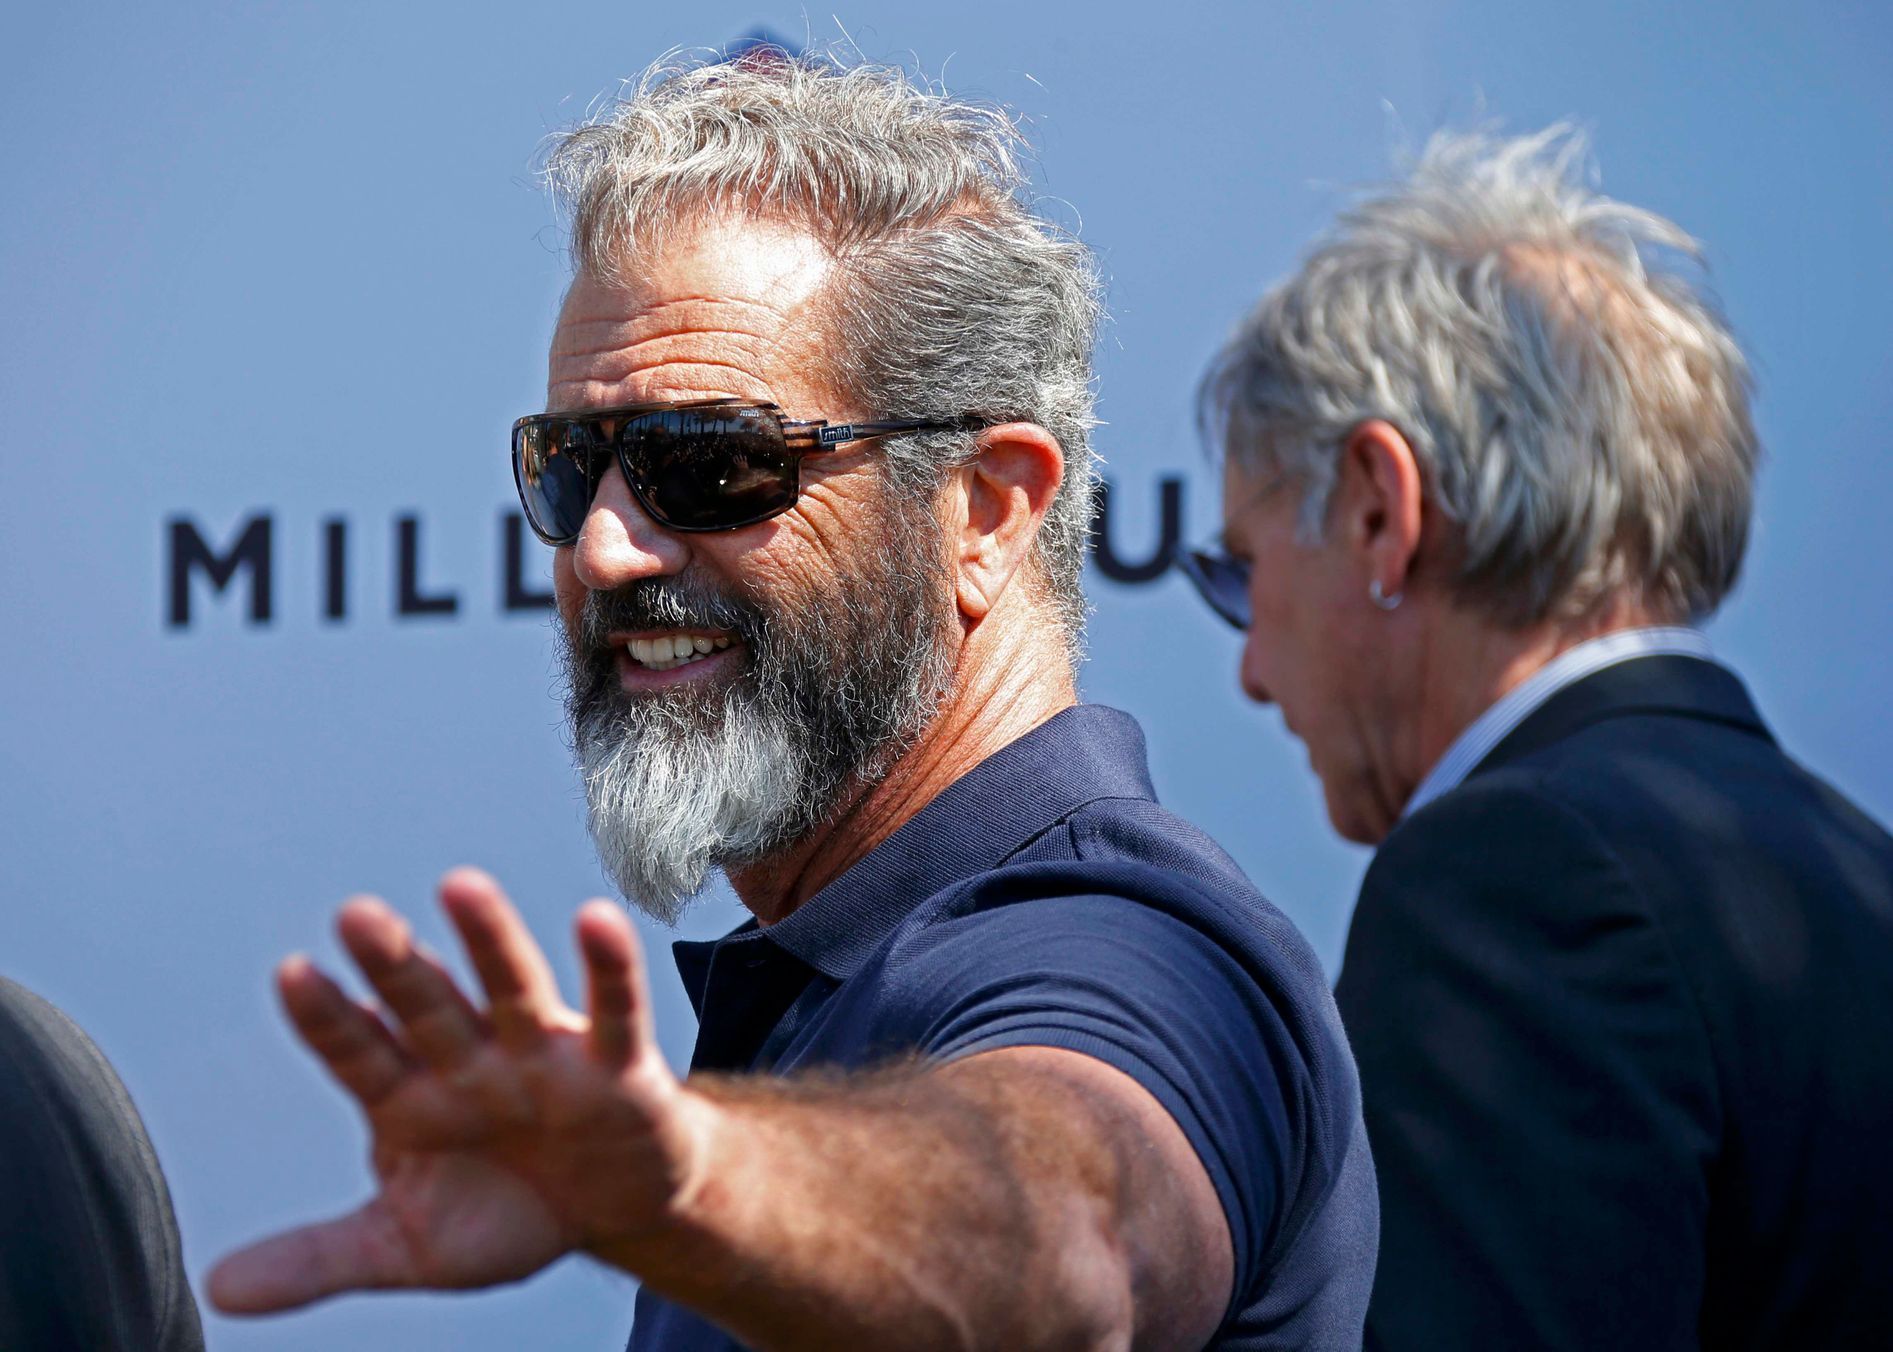 Cast members Mel Gibson and Harrison Ford pose  during a photocall on the Croisette to promote the film &quot;The Expendables 3&quot; during the 67th Cannes Film Festival in Cannes